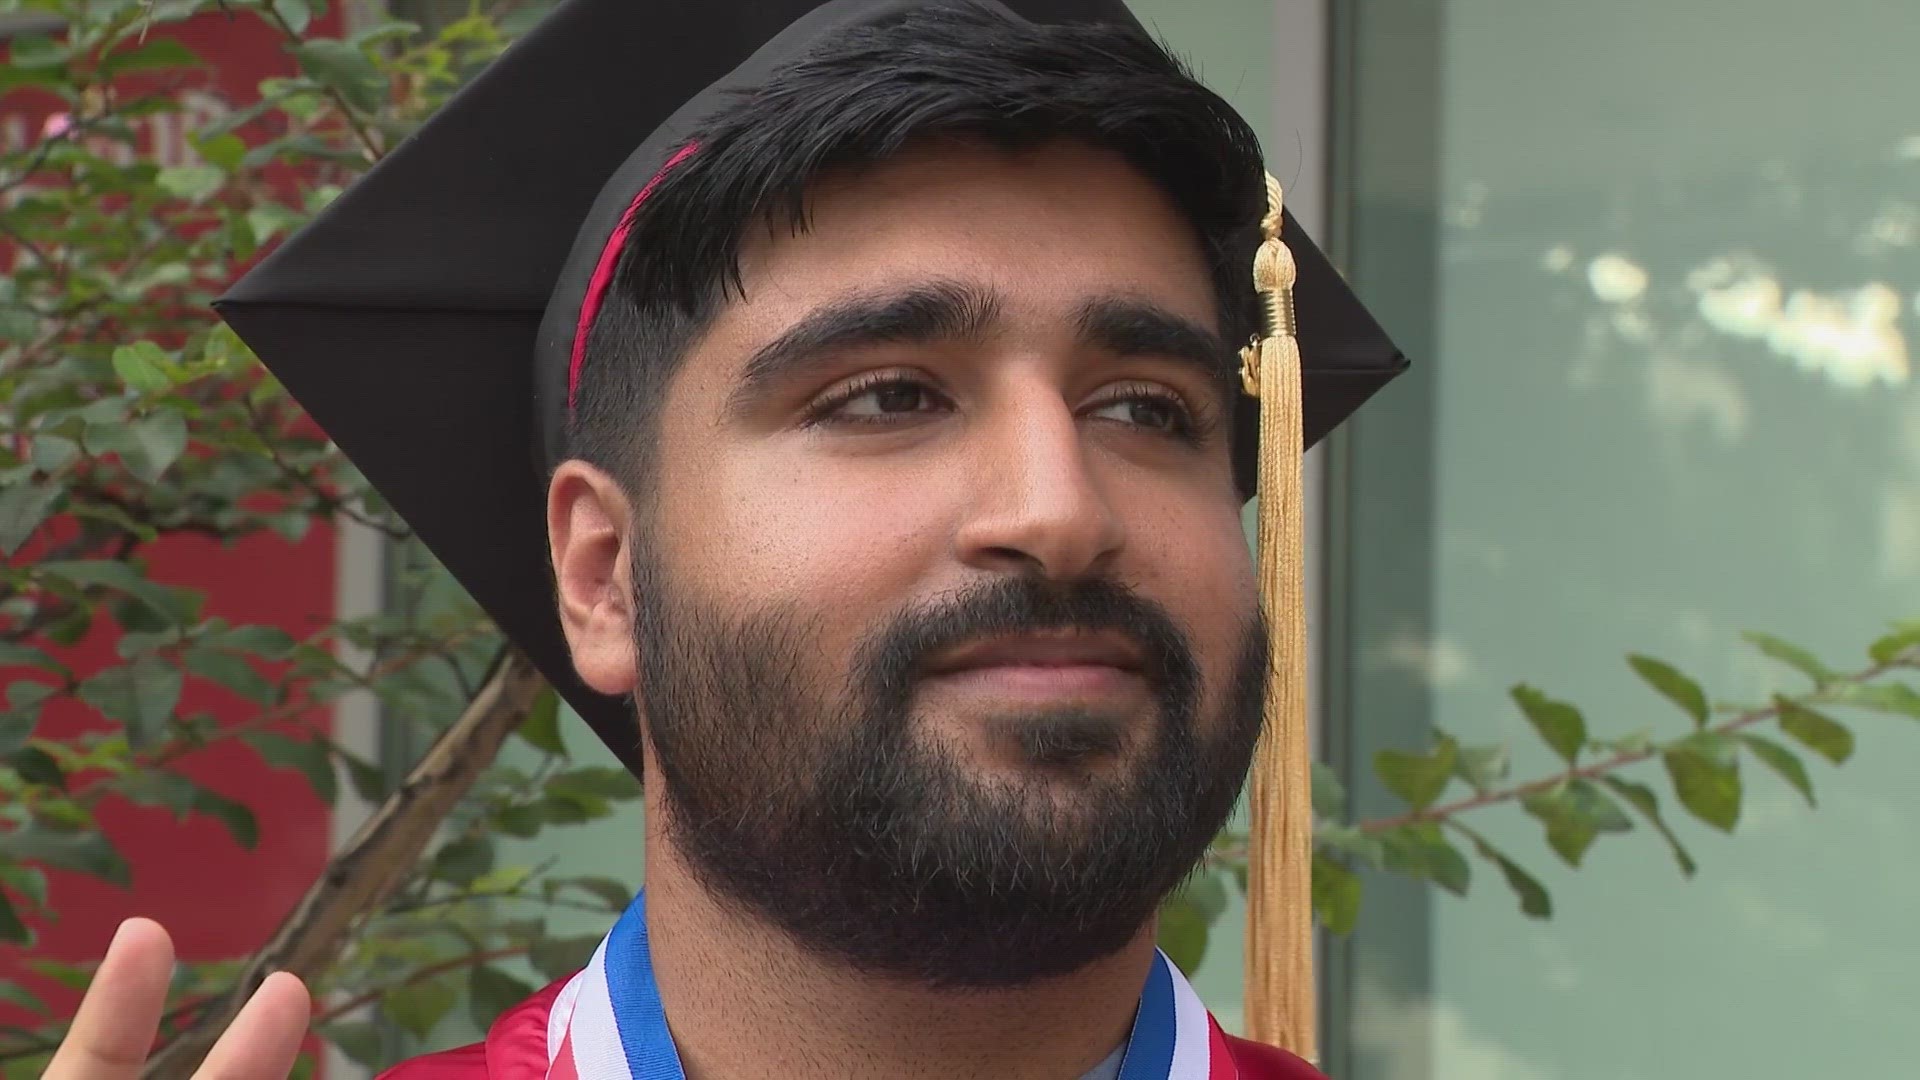 Saad Nadeem is making his family proud. His hard work for the last four years earned him three college degrees.